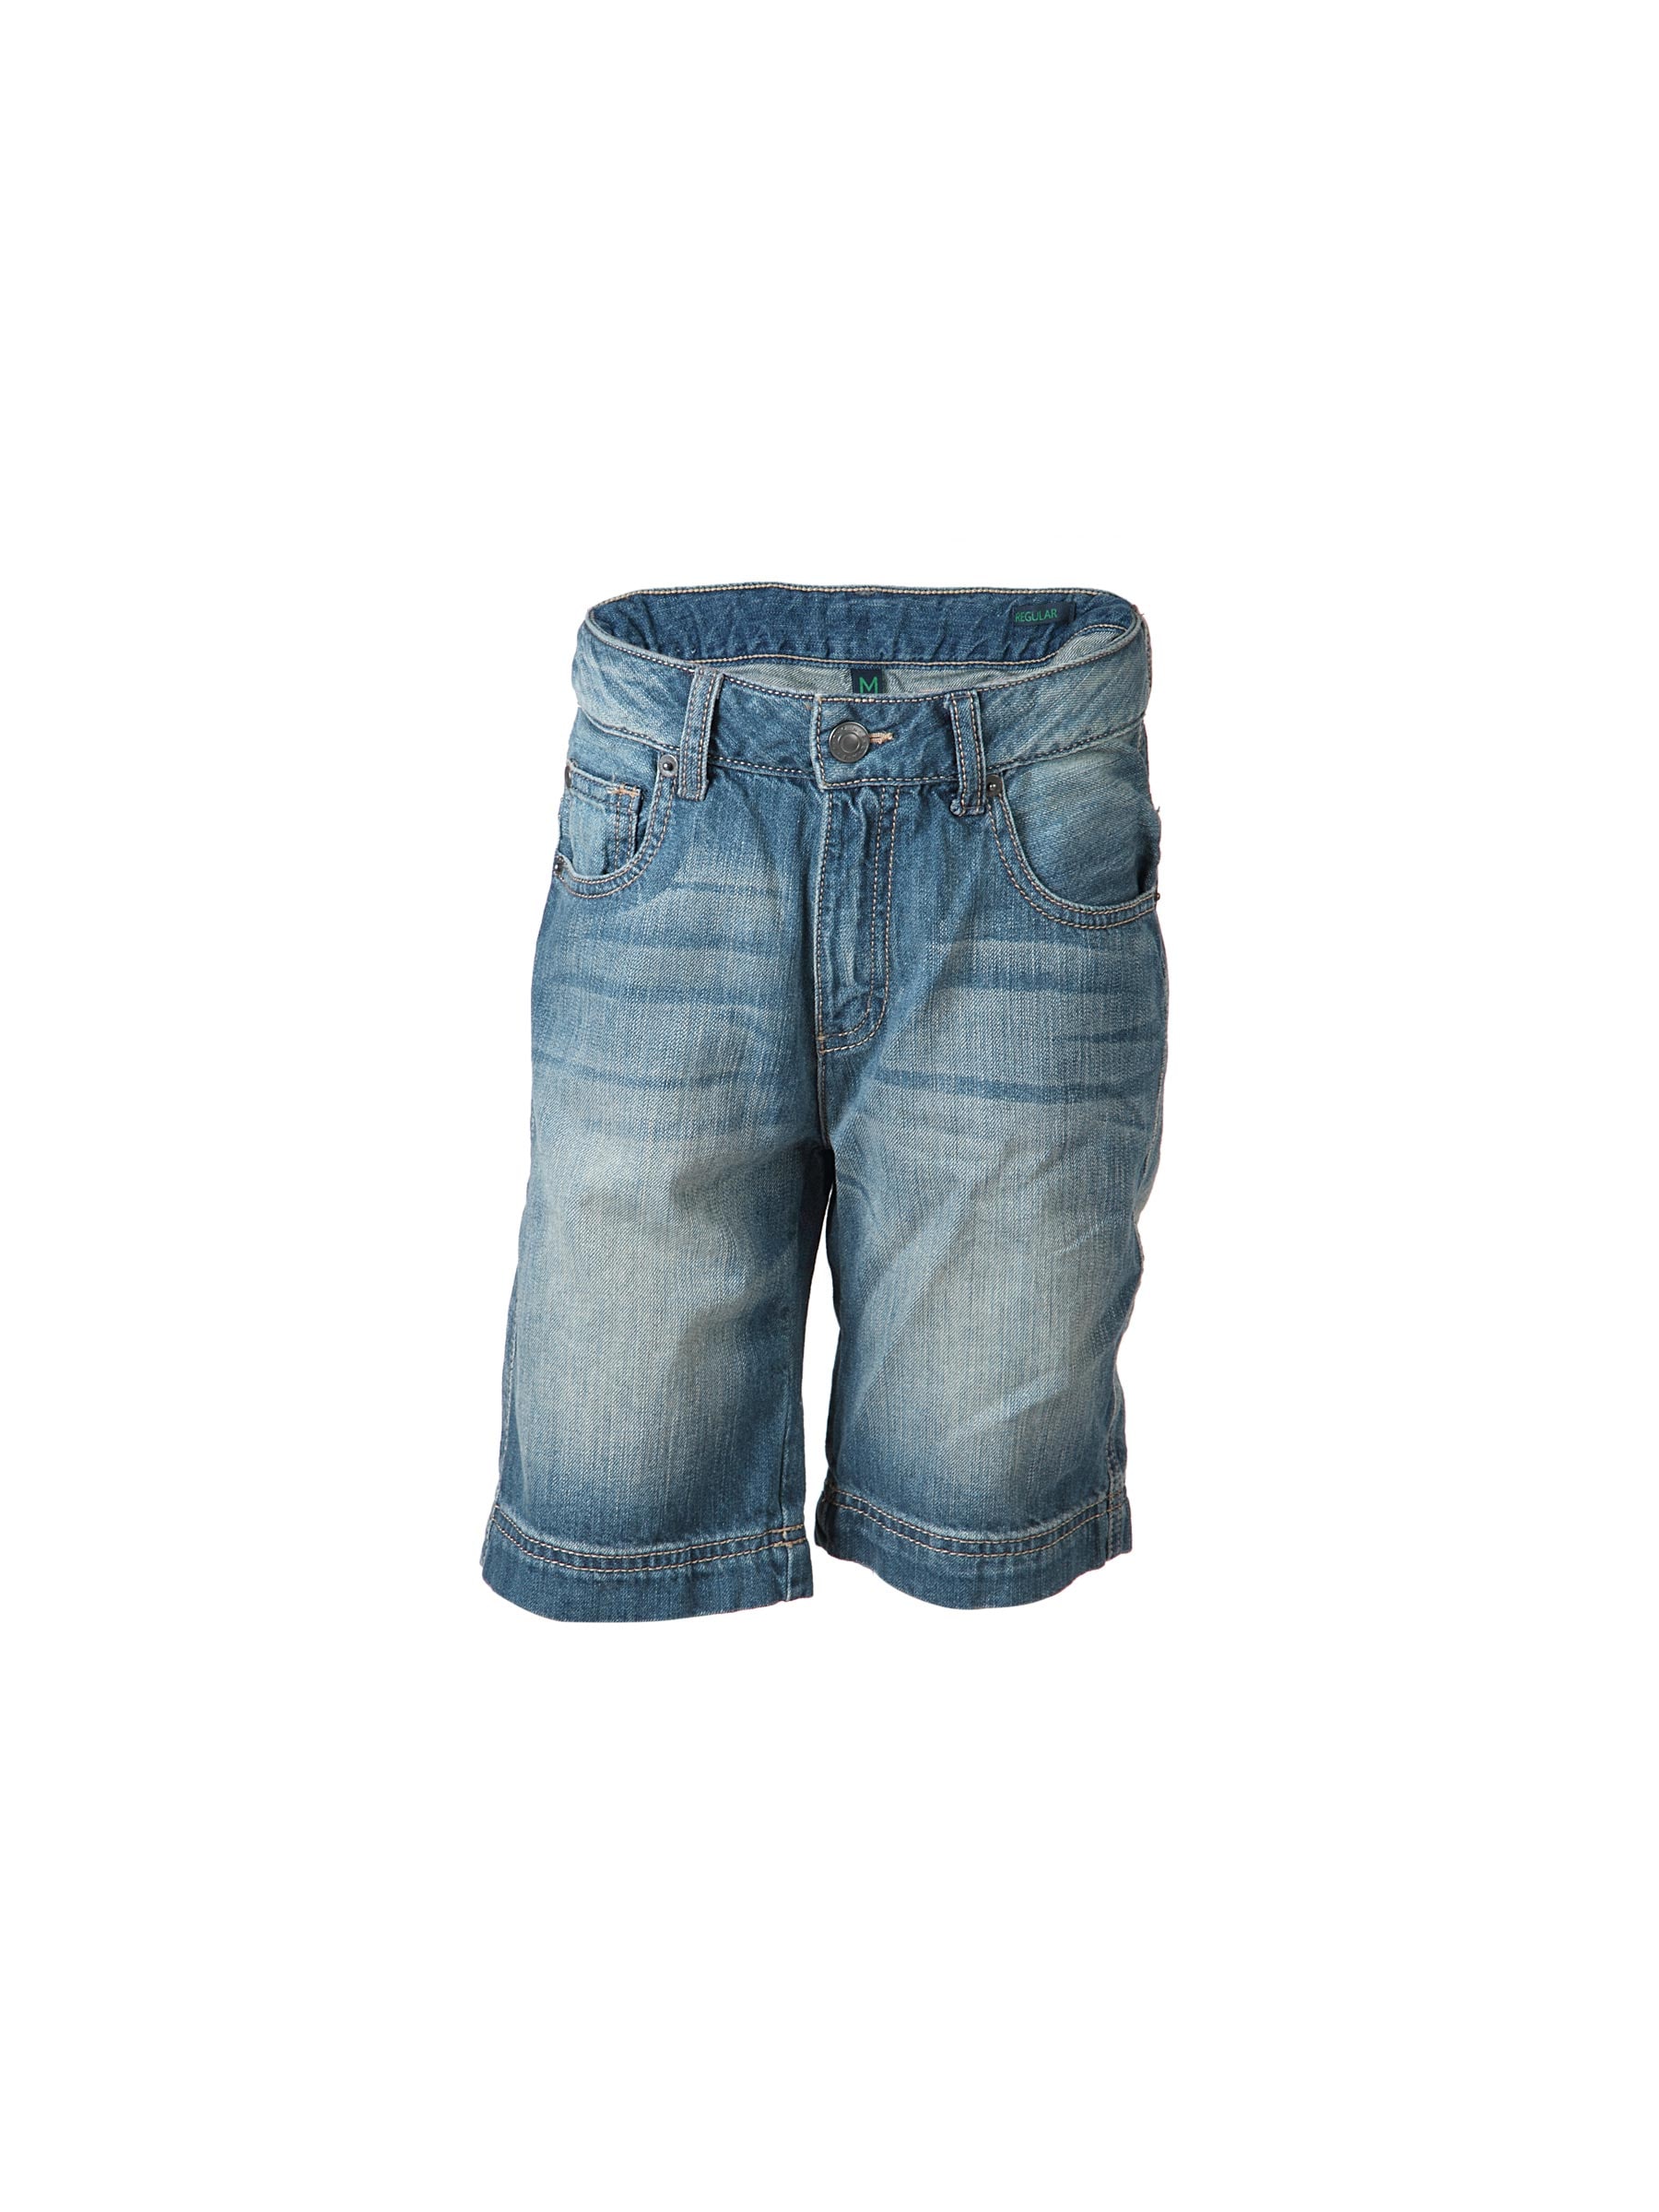 United Colors of Benetton Boys Boys Blue Washed Jeans